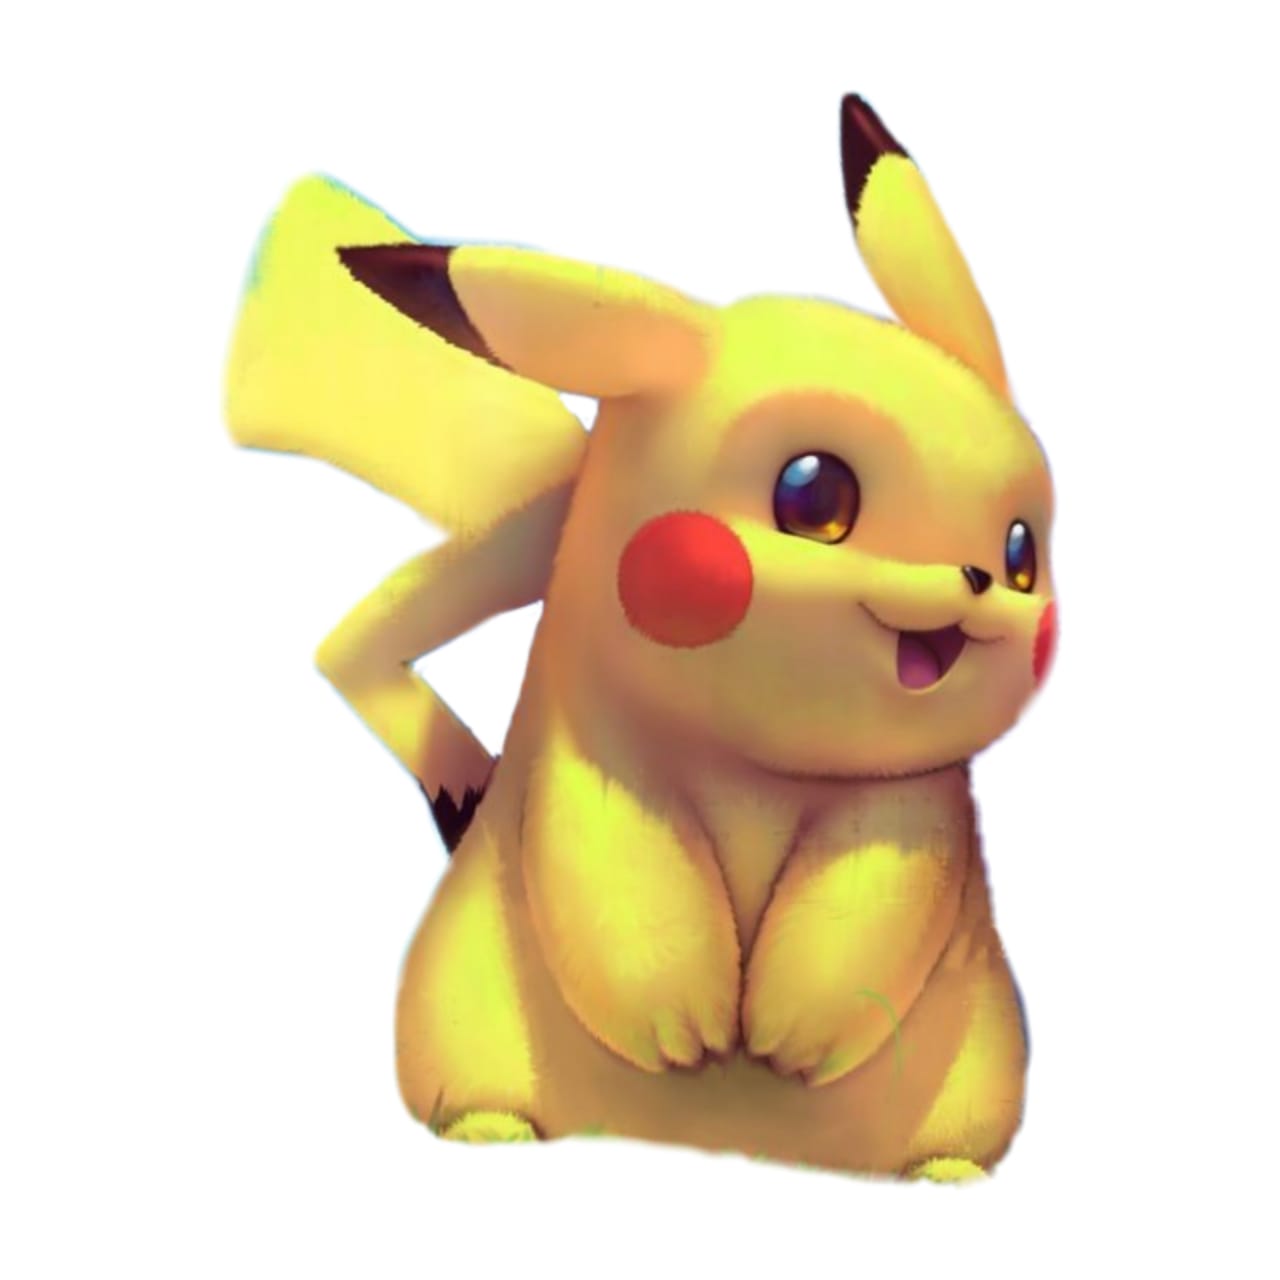 500+ Pikachu Images || Pikachu Images For Whatsapp DP || Pikachu DP For  Whatsapp - Mixing Images